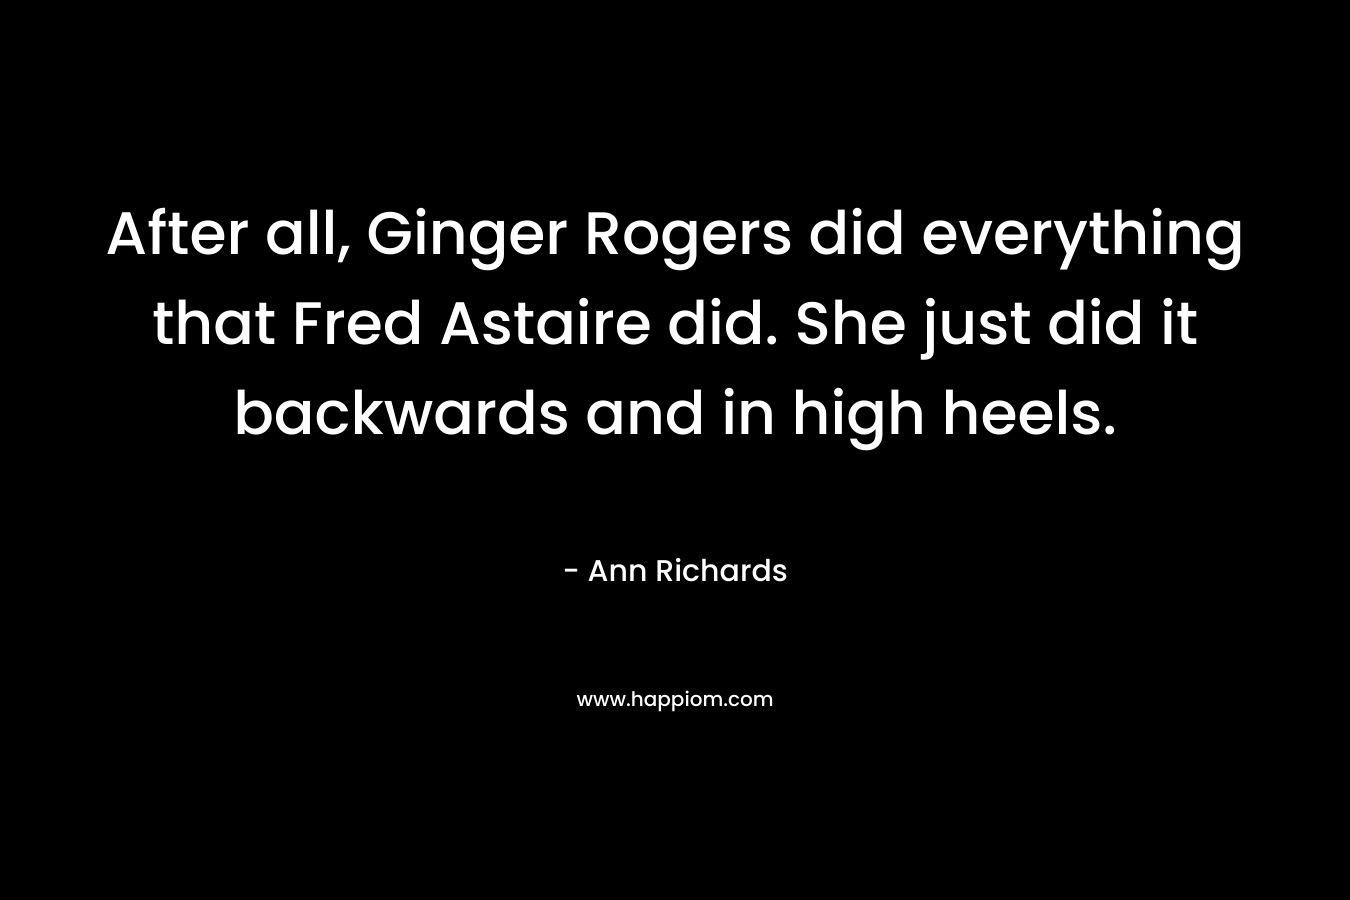 After all, Ginger Rogers did everything that Fred Astaire did. She just did it backwards and in high heels.